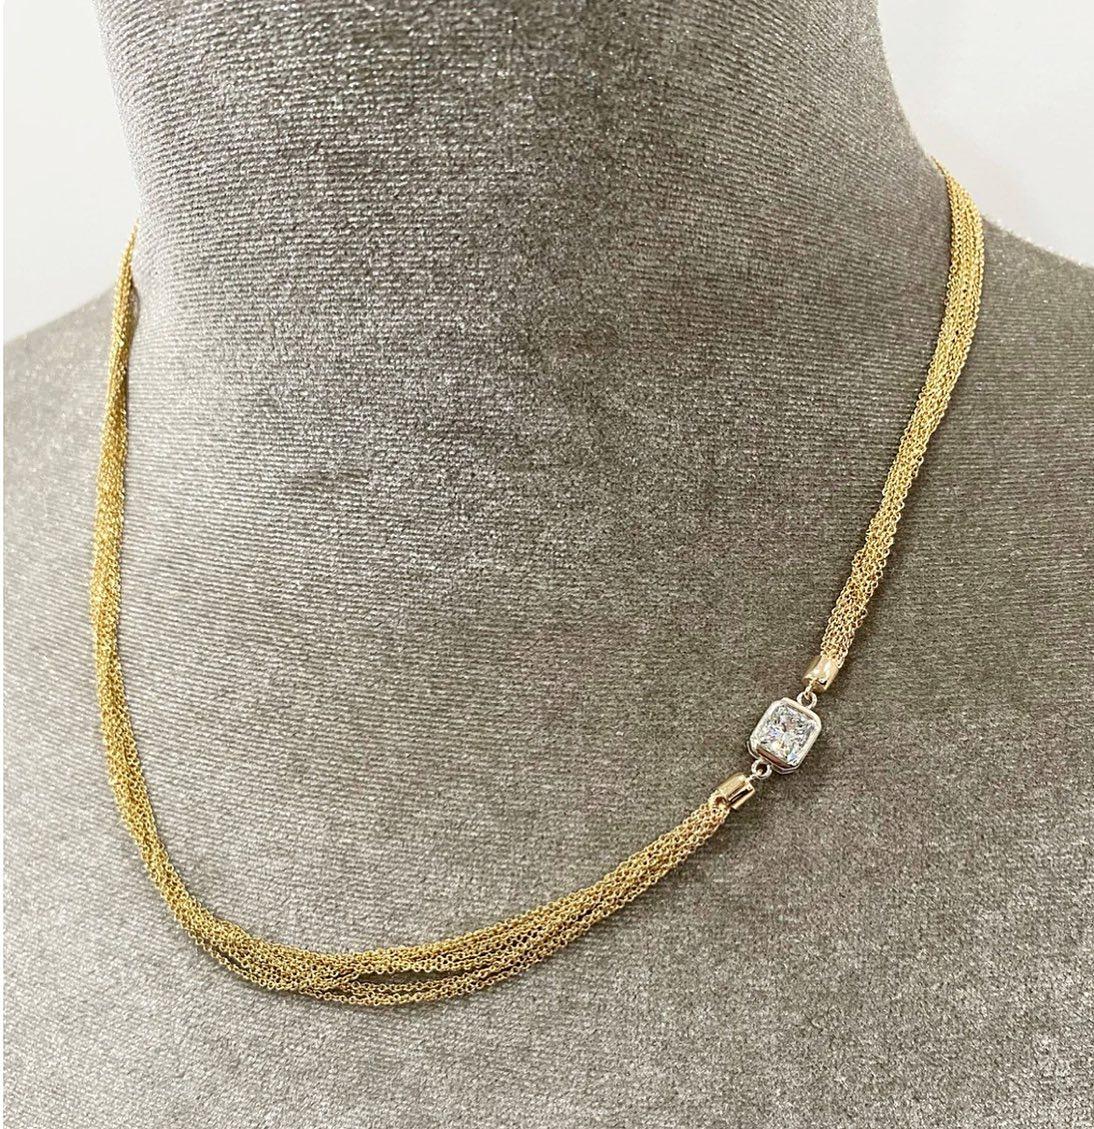 Radiant Diamond Chain Necklace In New Condition For Sale In Phoenix, AZ